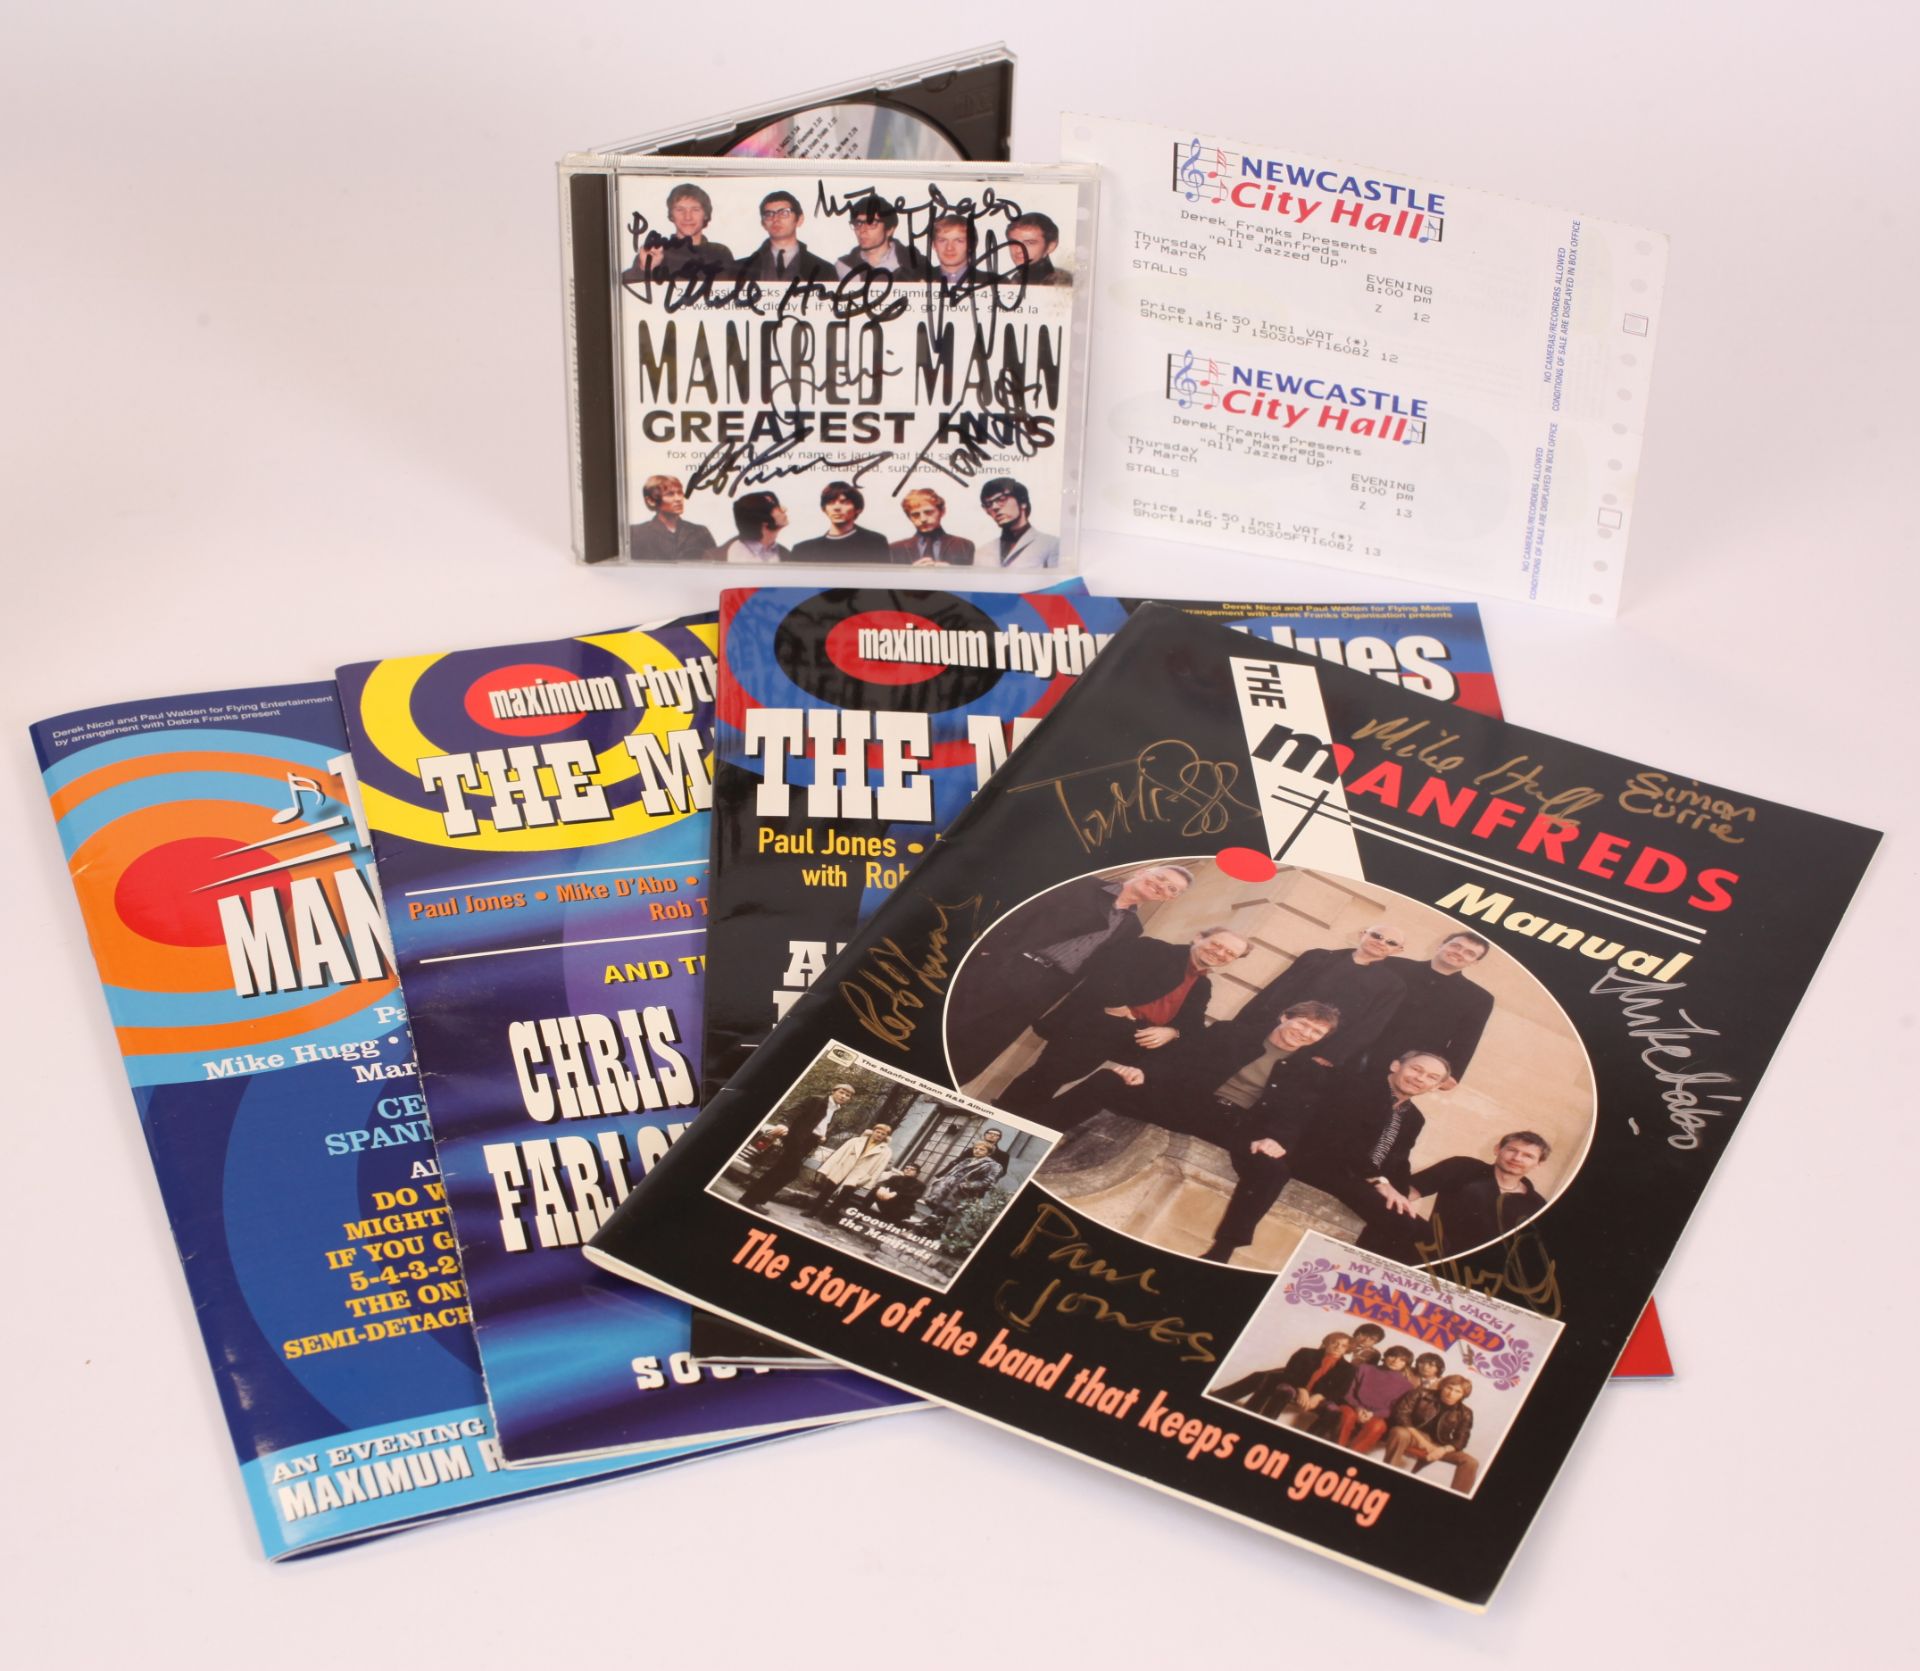 A Collection Of Moody Blues and The Manfreds Tour Memorabilia